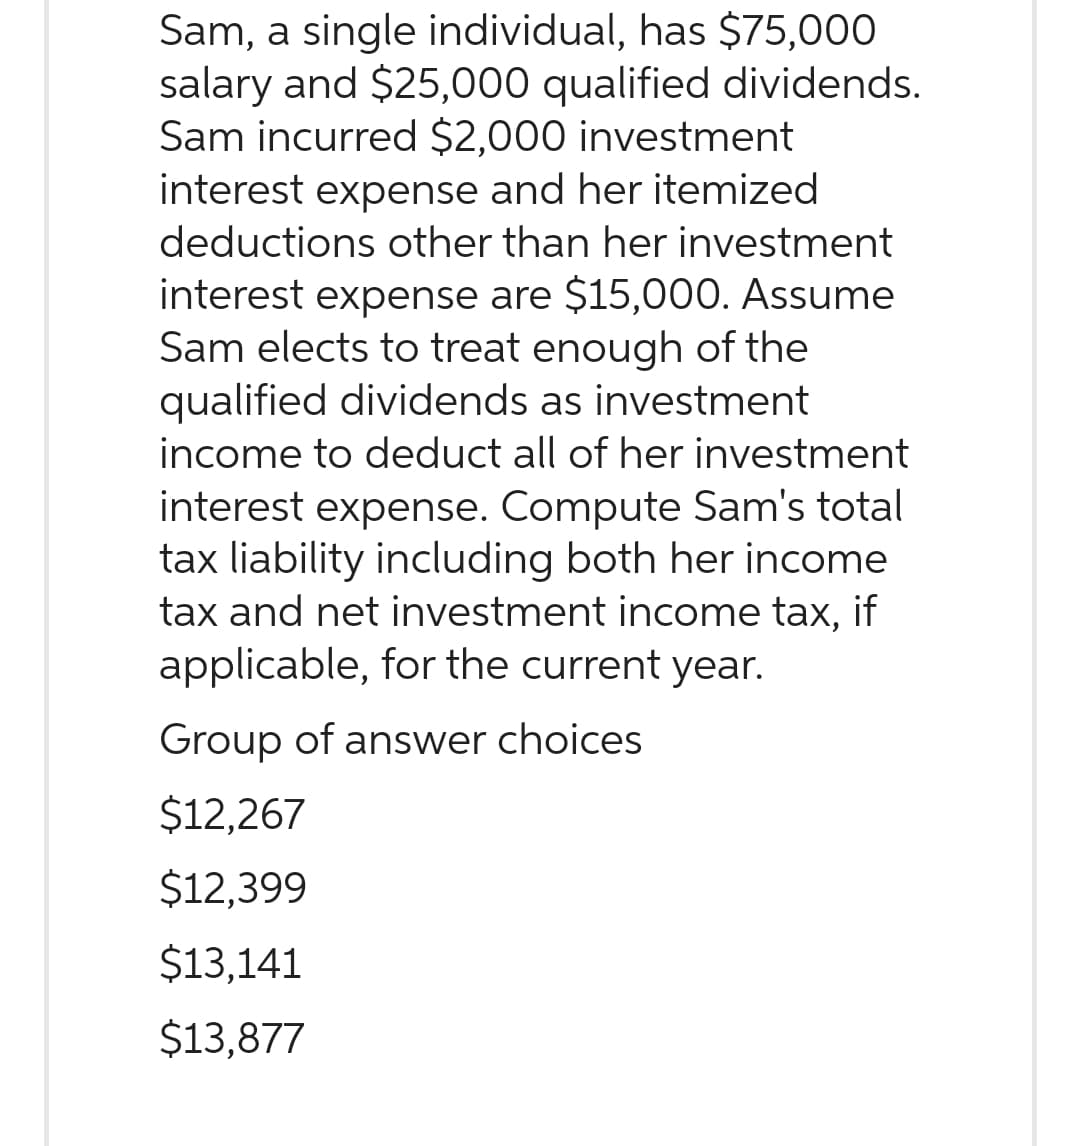 Sam, a single individual, has $75,000
salary and $25,000 qualified dividends.
Sam incurred $2,000 investment
interest expense and her itemized
deductions other than her investment
interest expense are $15,000. Assume
Sam elects to treat enough of the
qualified dividends as investment
income to deduct all of her investment
interest expense. Compute Sam's total
tax liability including both her income
tax and net investment income tax, if
applicable, for the current year.
Group of answer choices
$12,267
$12,399
$13,141
$13,877